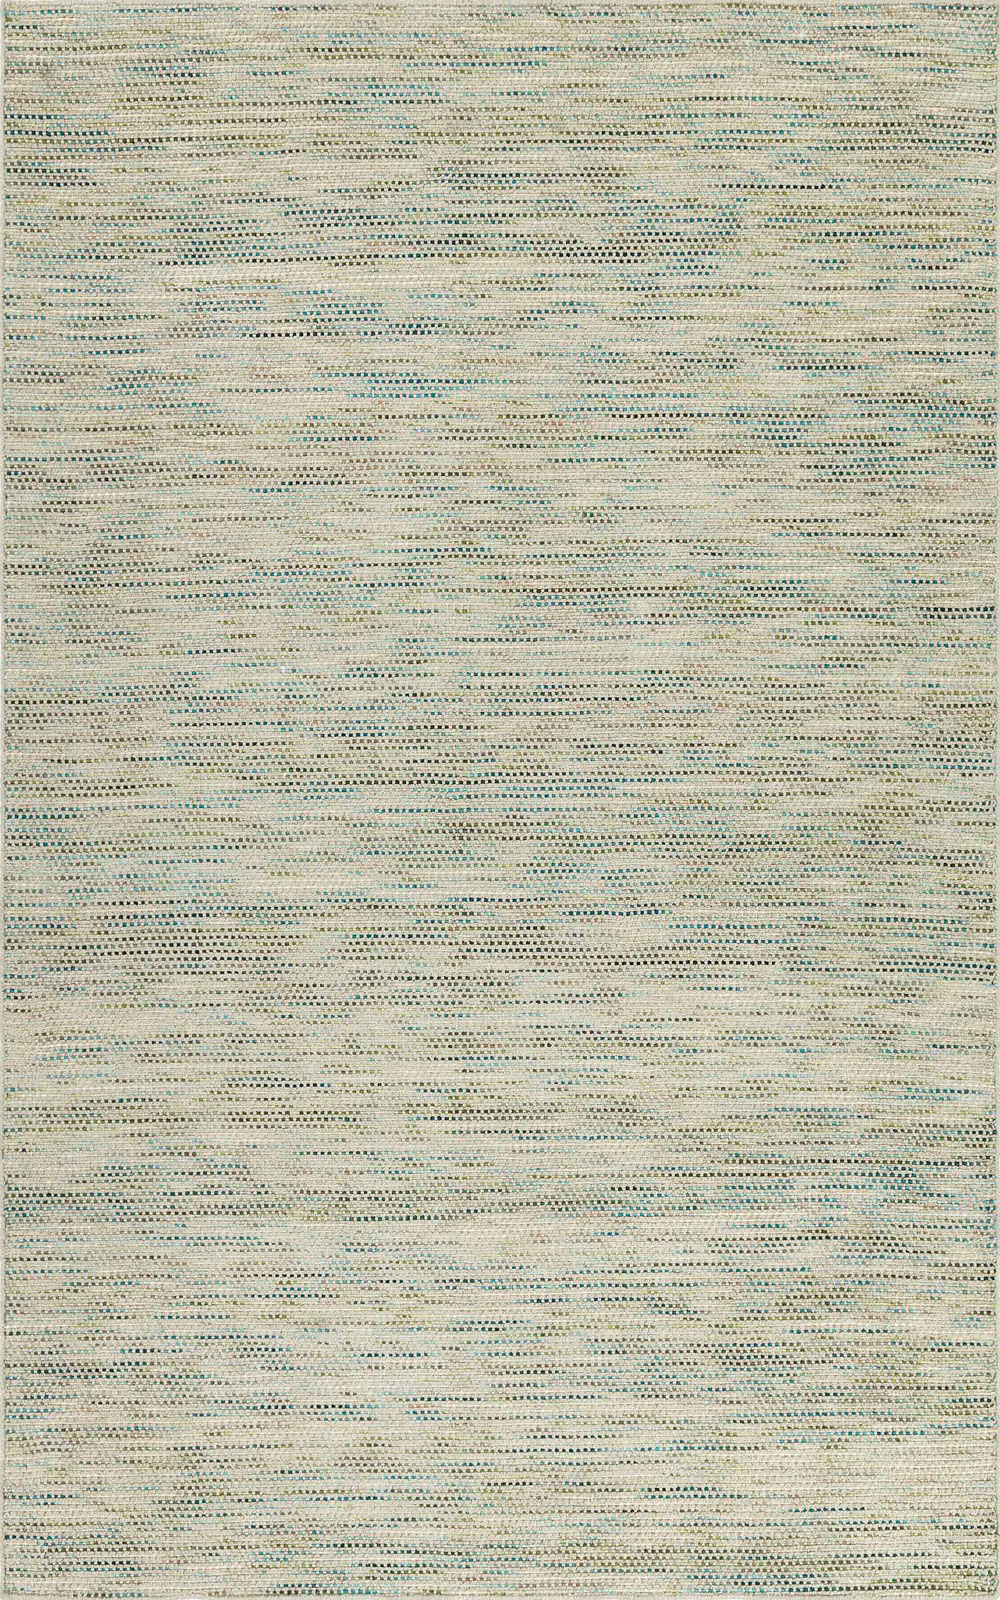 Dalyn Zion ZN1 Taupe Rug